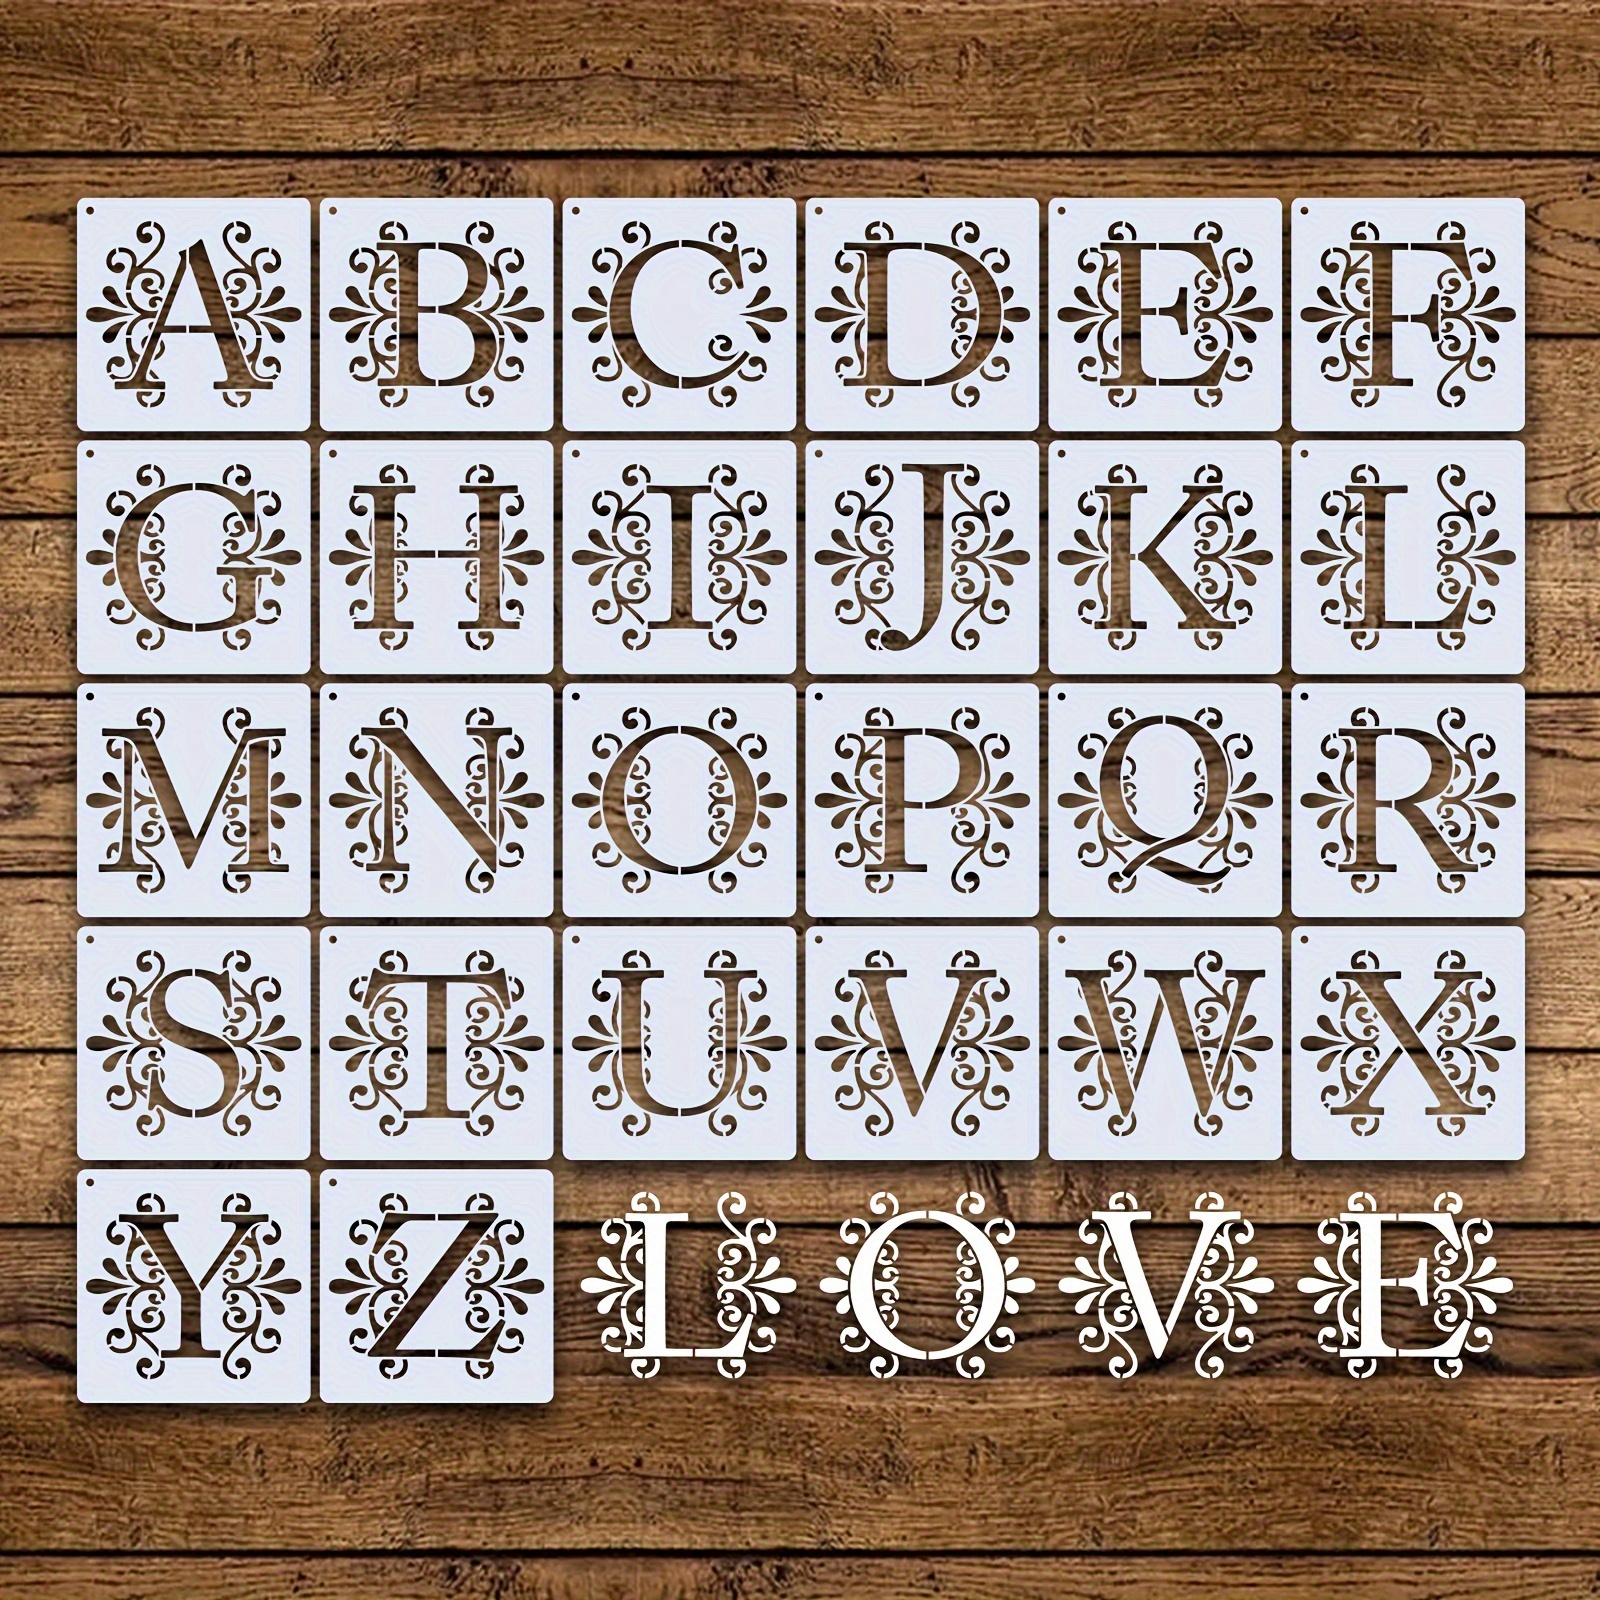 

26 Pcs Letter Painting Stencils, 5x5 Inch Spray Paint Lettering Letter Templates, Reusable Plastic Stencils For Painting On Wood Wall Tile Home Decor